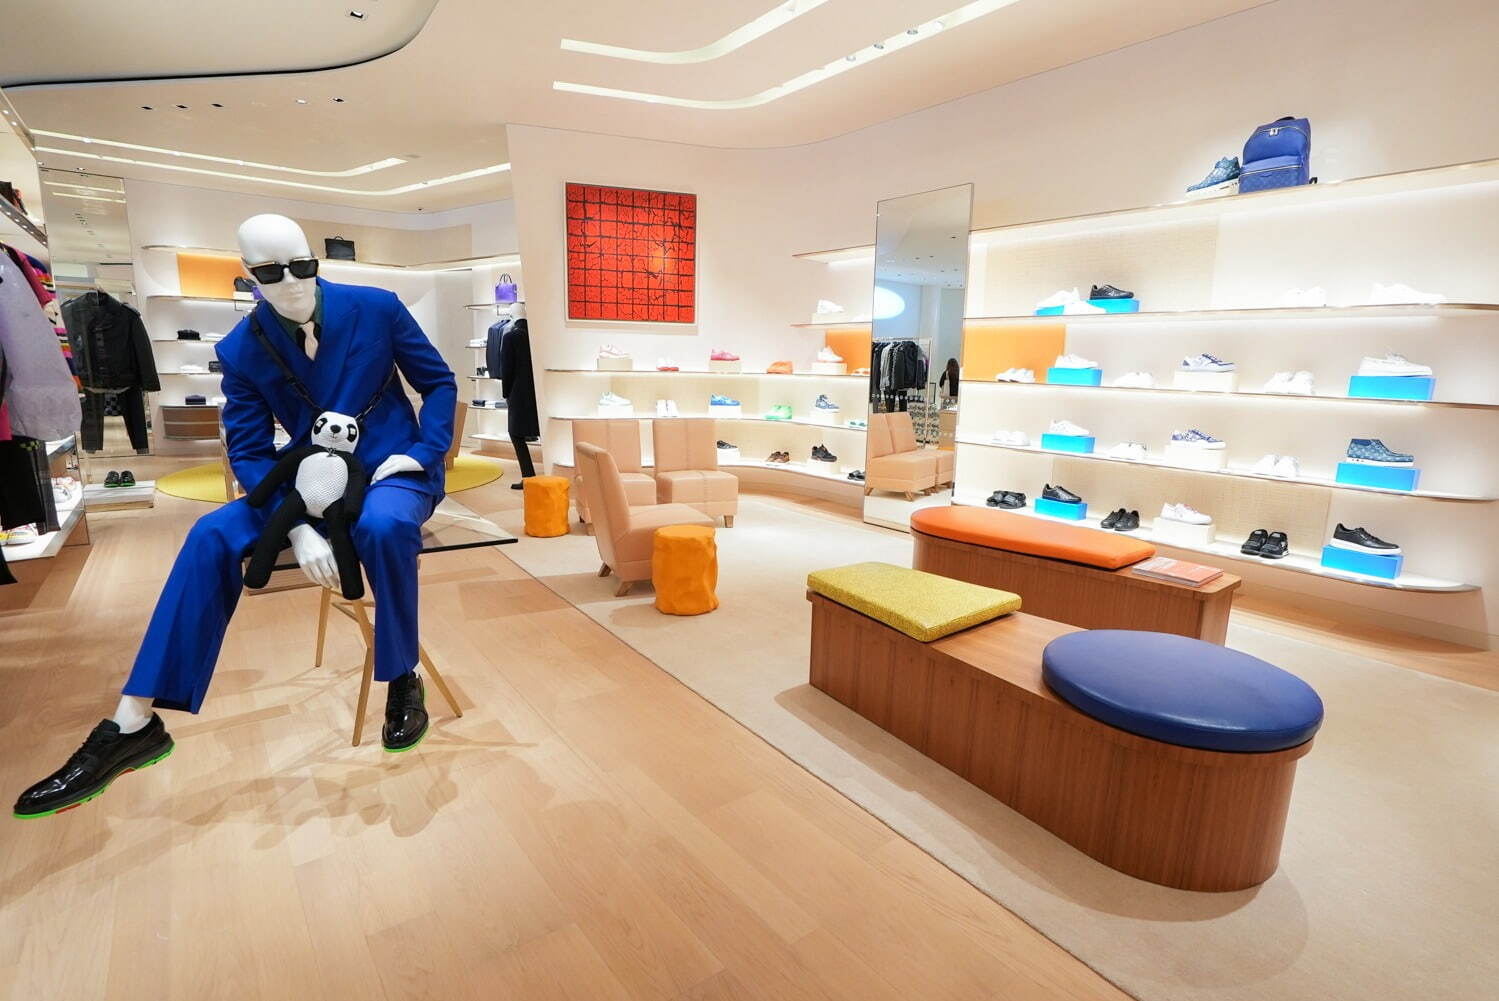 New Louis Vuitton Ginza Namiki flagship store in Tokyo inspired by water -  Domus